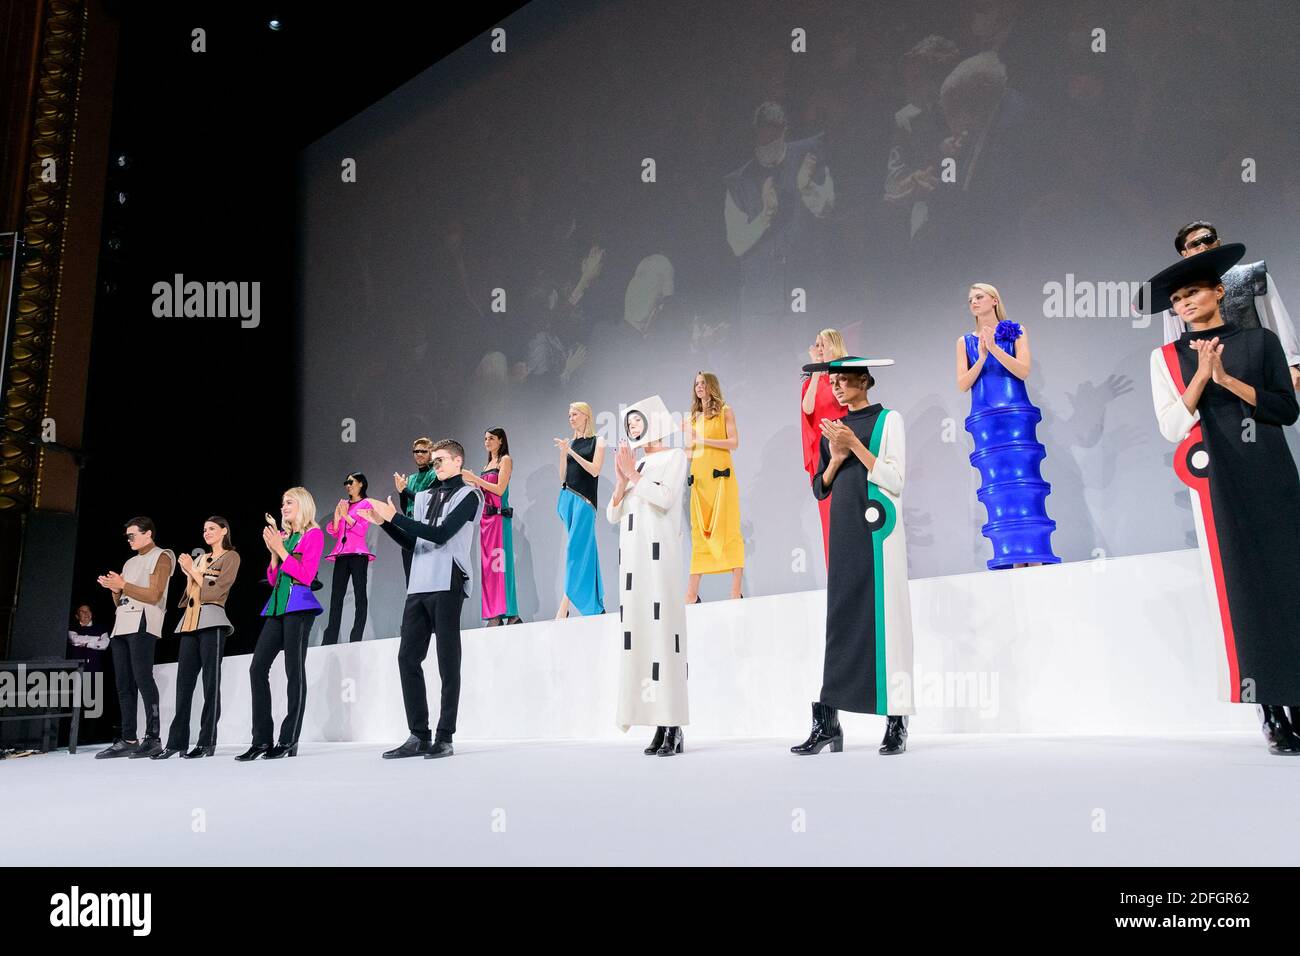 The last couture collection of Pierre Cardin and Pierre Cardin Studio  presented during the 70th anniversary of the House Pierre Cardin, as part  of the "House of Cardin" event hold on September